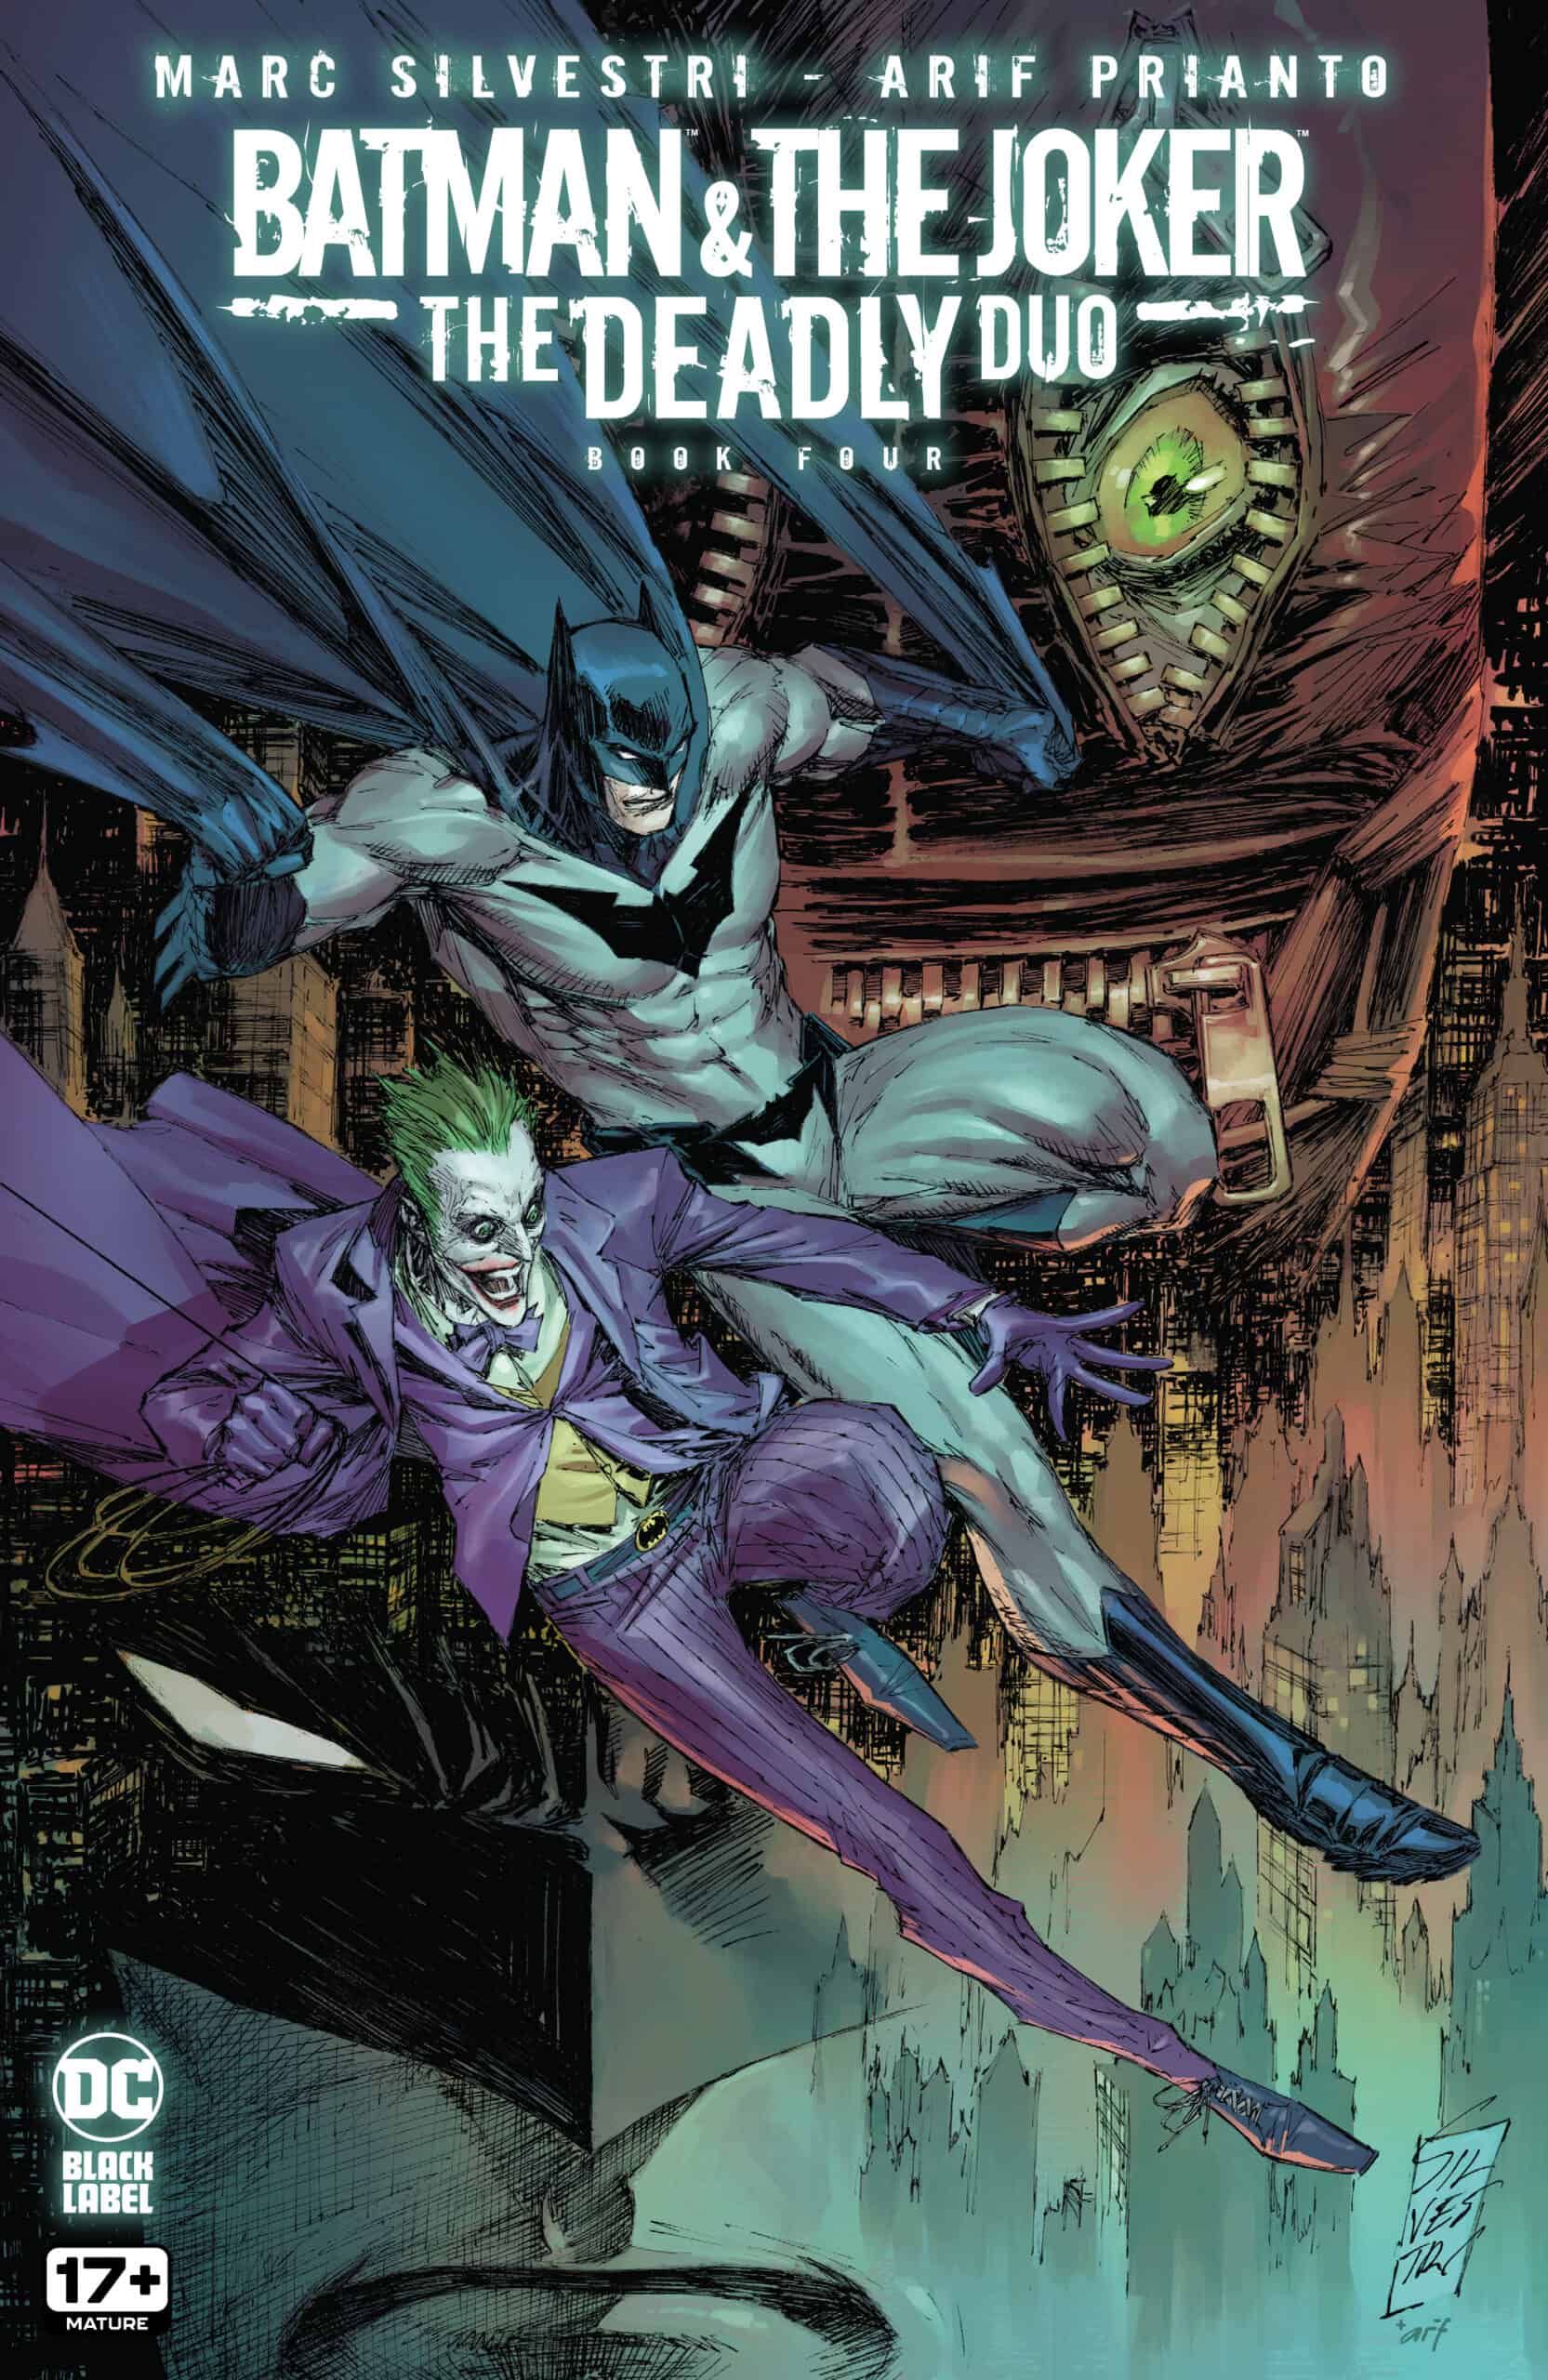 DC Comics Sneak Preview for February 7, 2023: The Most Unlikely Team Up  Continues in BATMAN & THE JOKER: THE DEADLY DUO #4 - Comic Watch